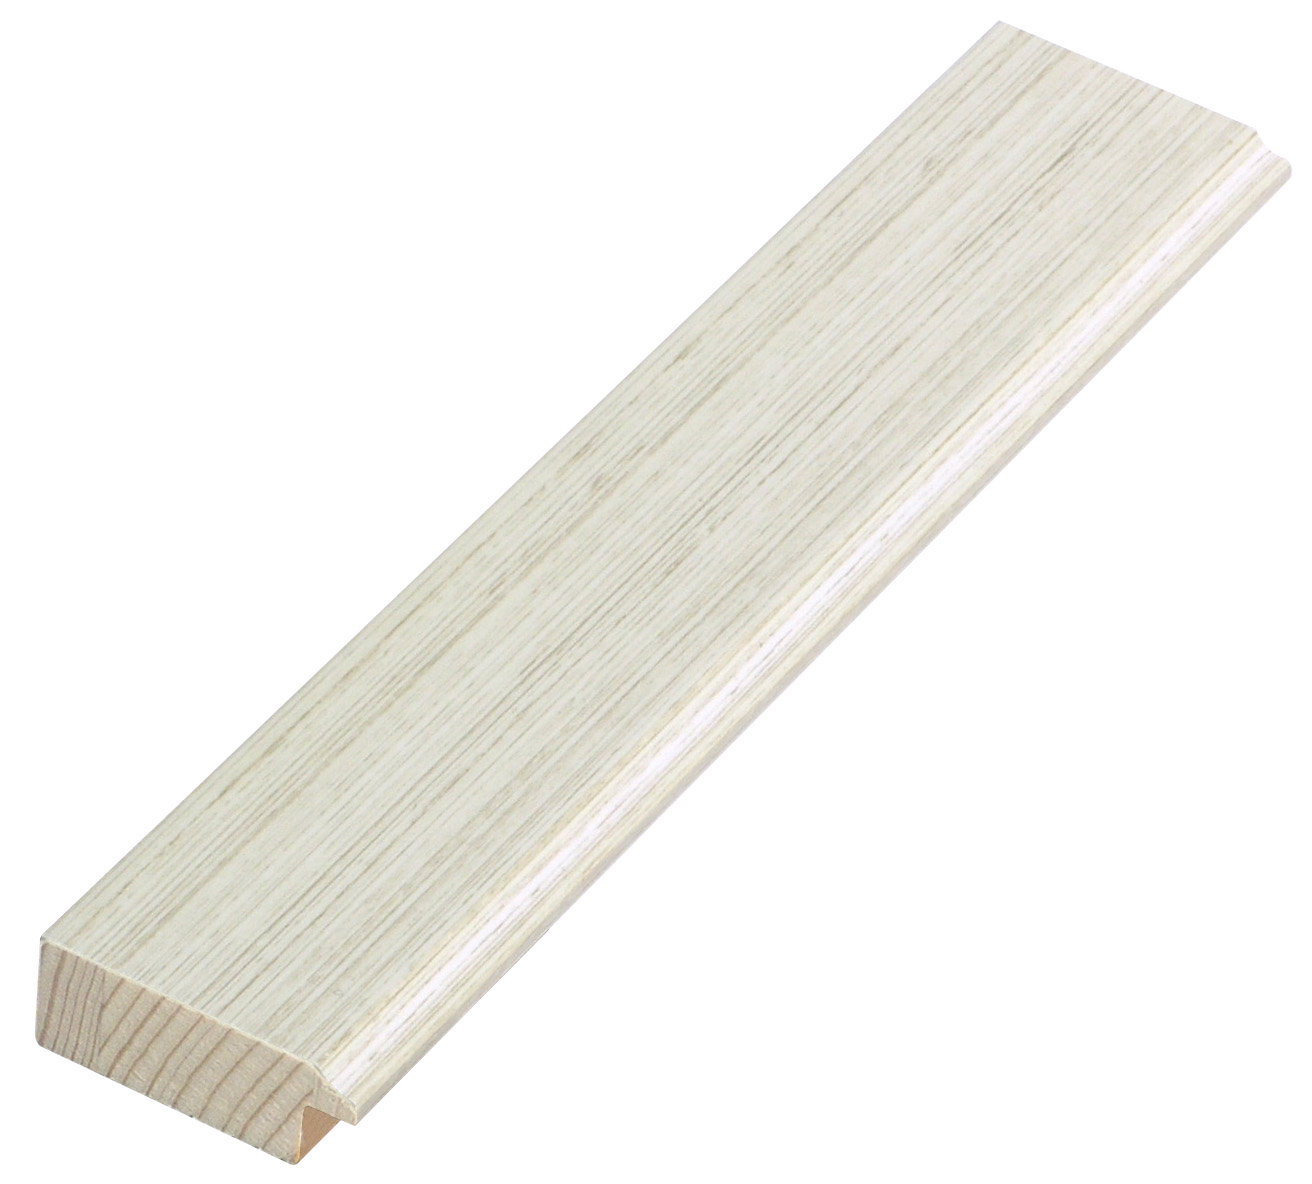 Liner finger-jointed pine 38mm - Cream, wired texture